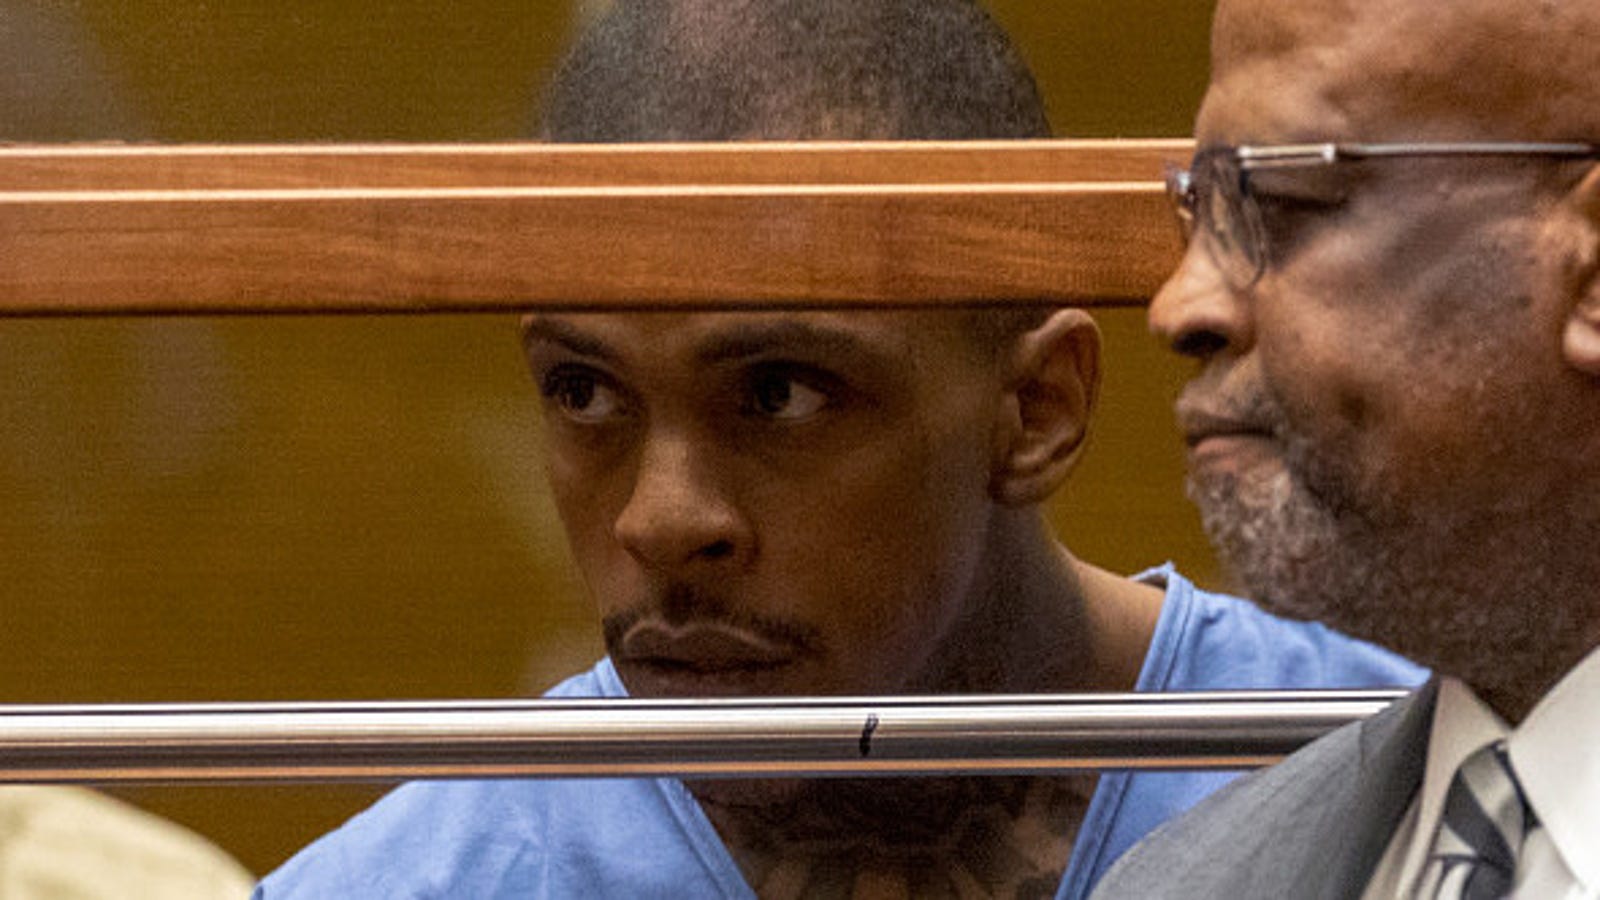 Eric Holder, Accused Killer of Nipsey Hussle, Pistol-Whipped a Man Day of Shooting ...